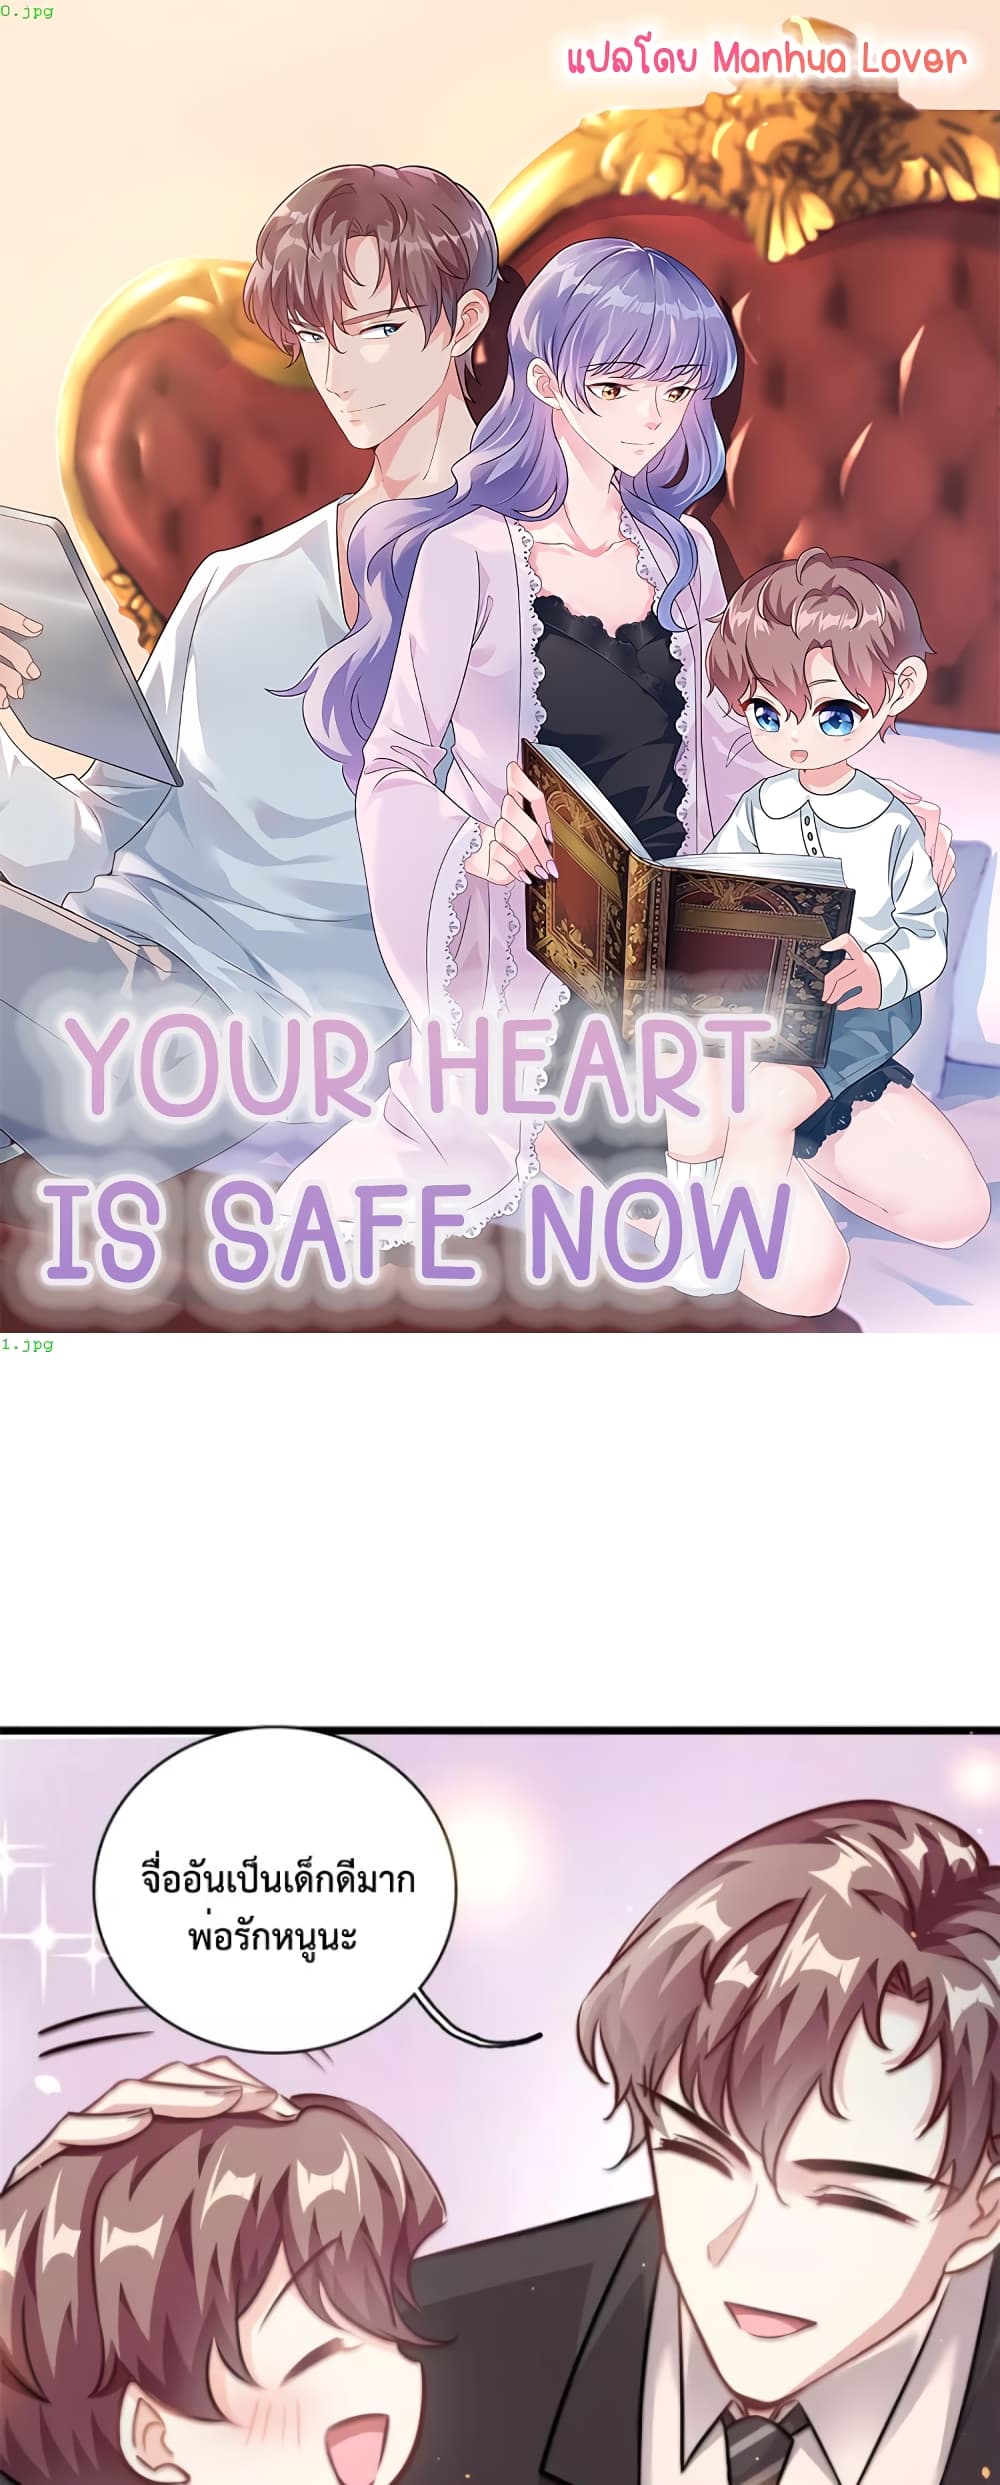 Your Heart Is Safe Now 33-33